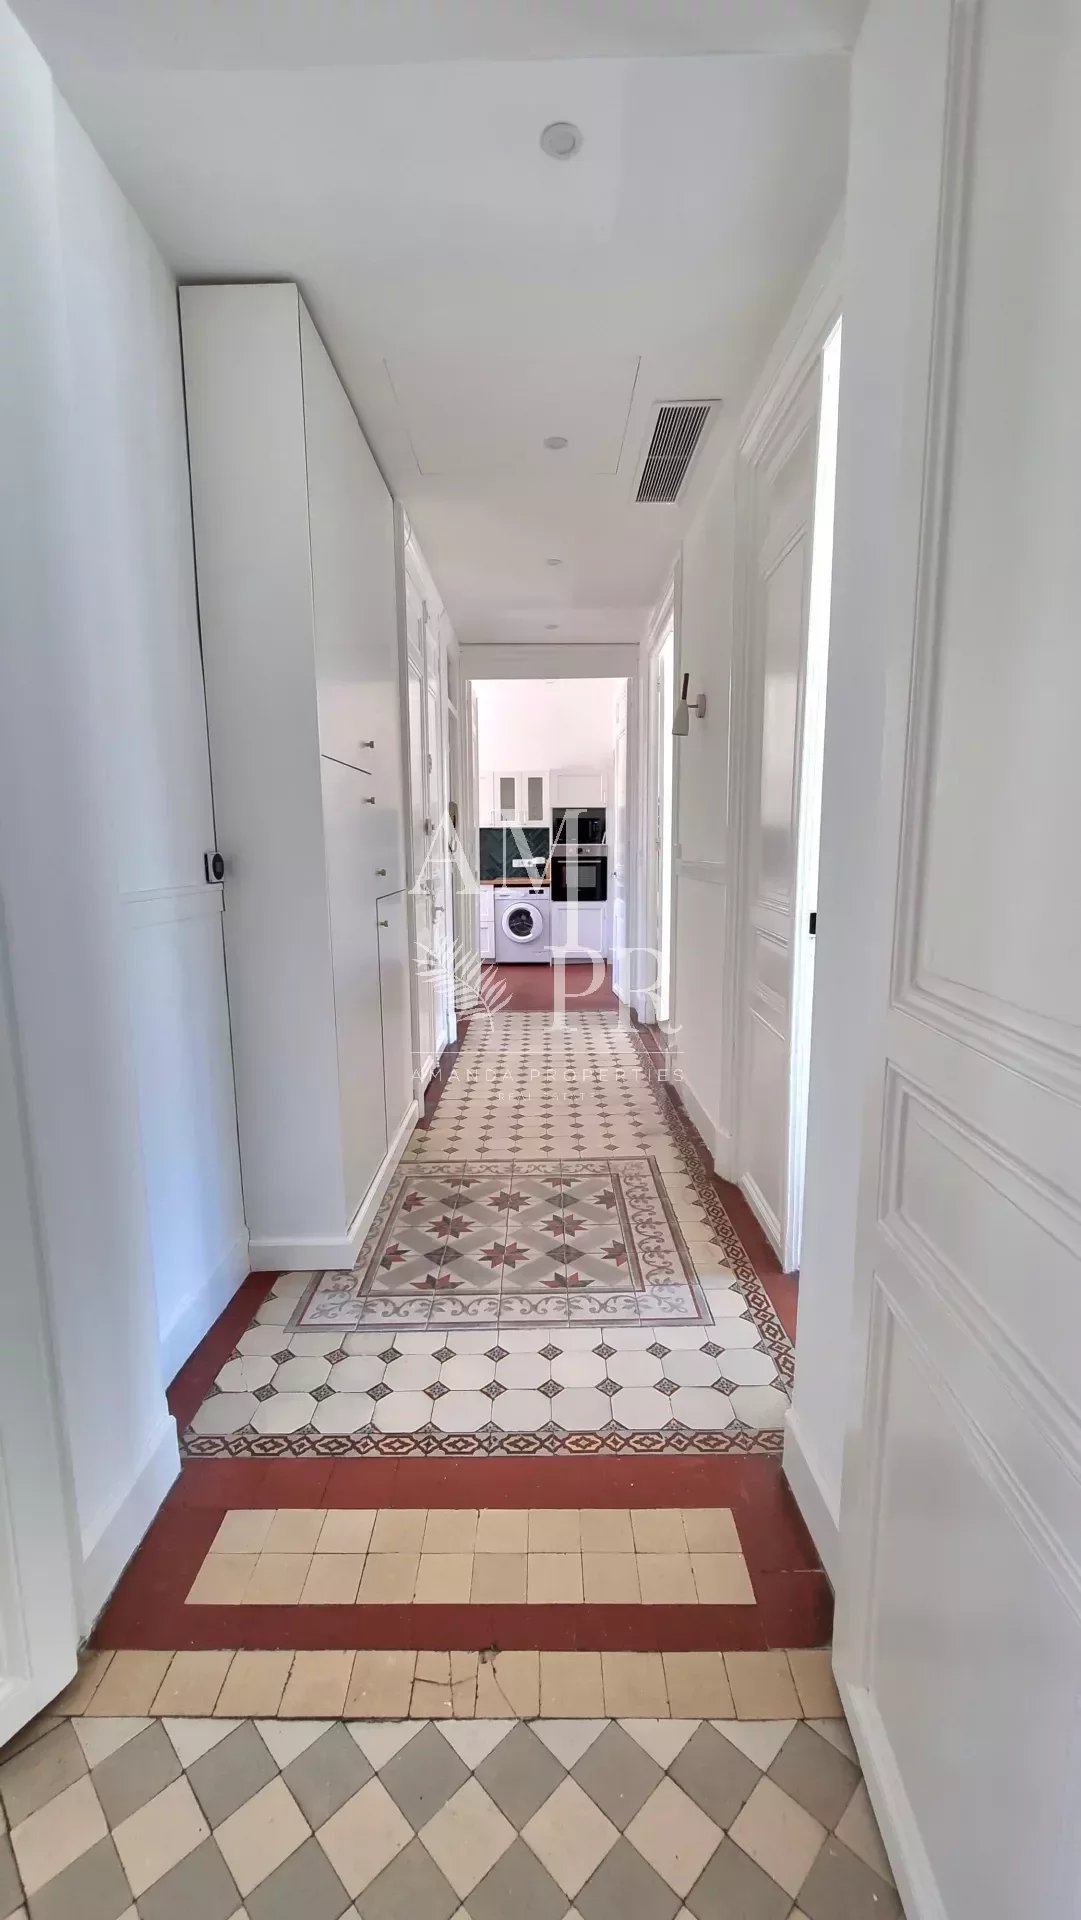 Cannes downtown - 3 rooms apartment - Beaches and shops